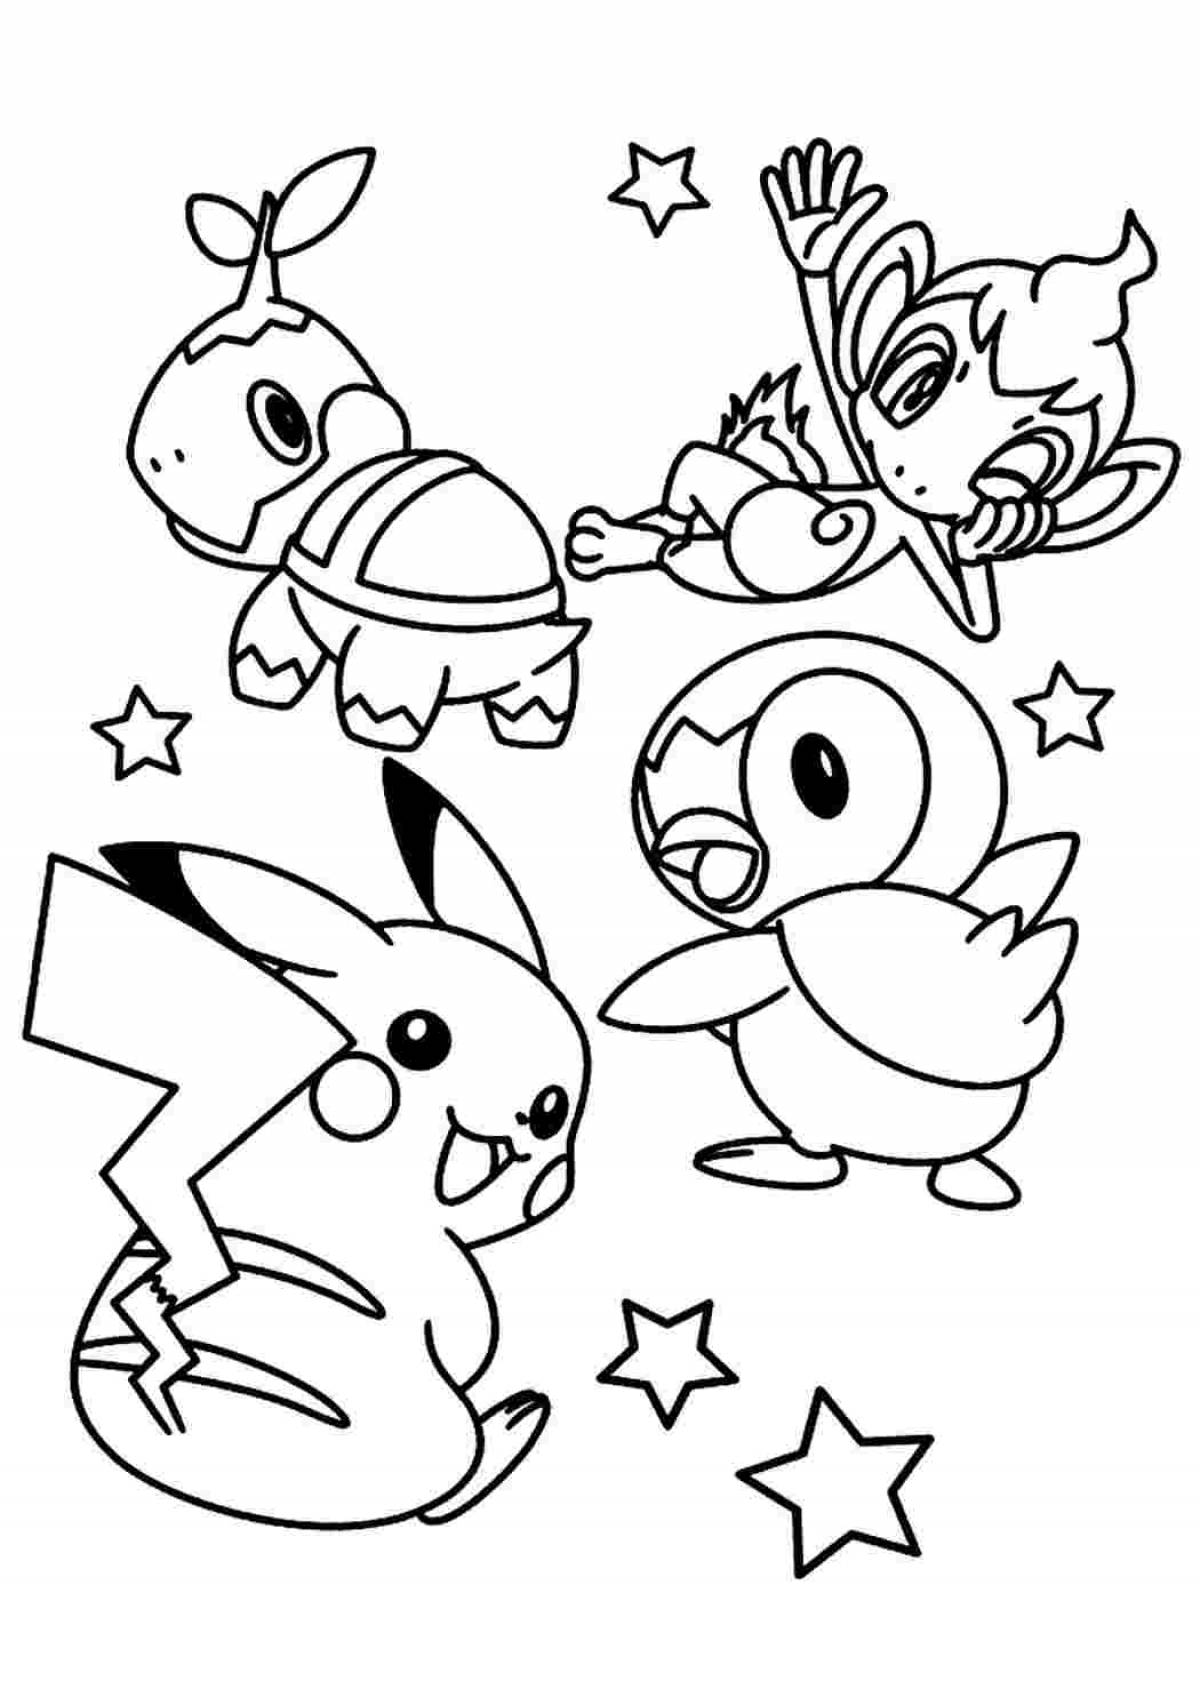 Elegant pokemon pictures coloring pages